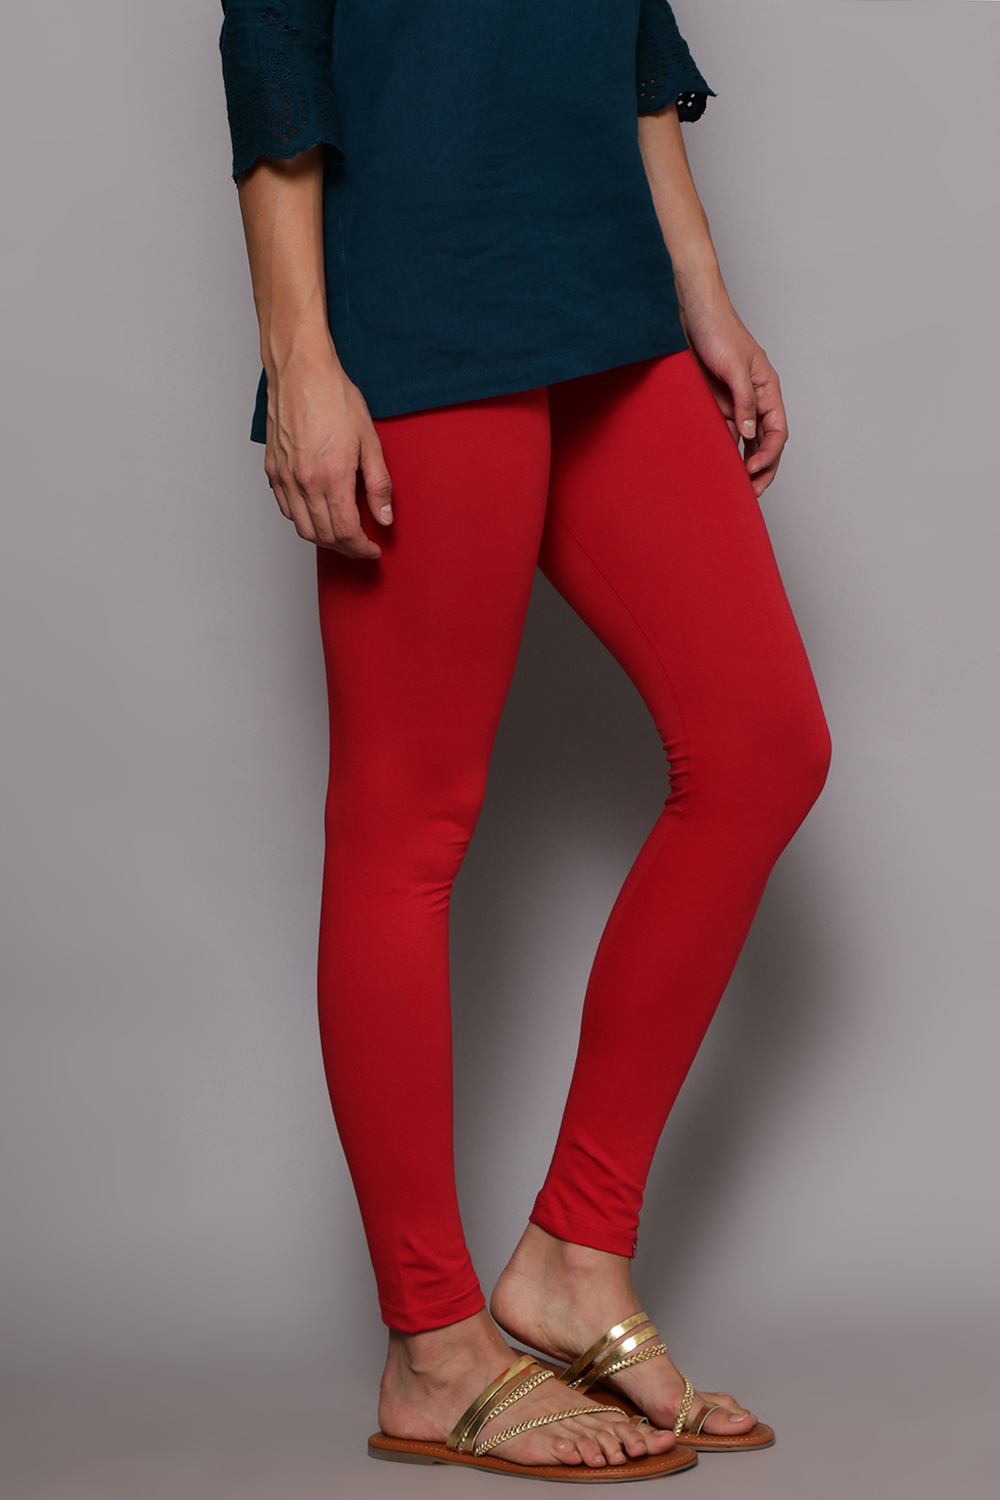 BIBA Cotton And Polyester Leggings M (Red) in Bangalore at best